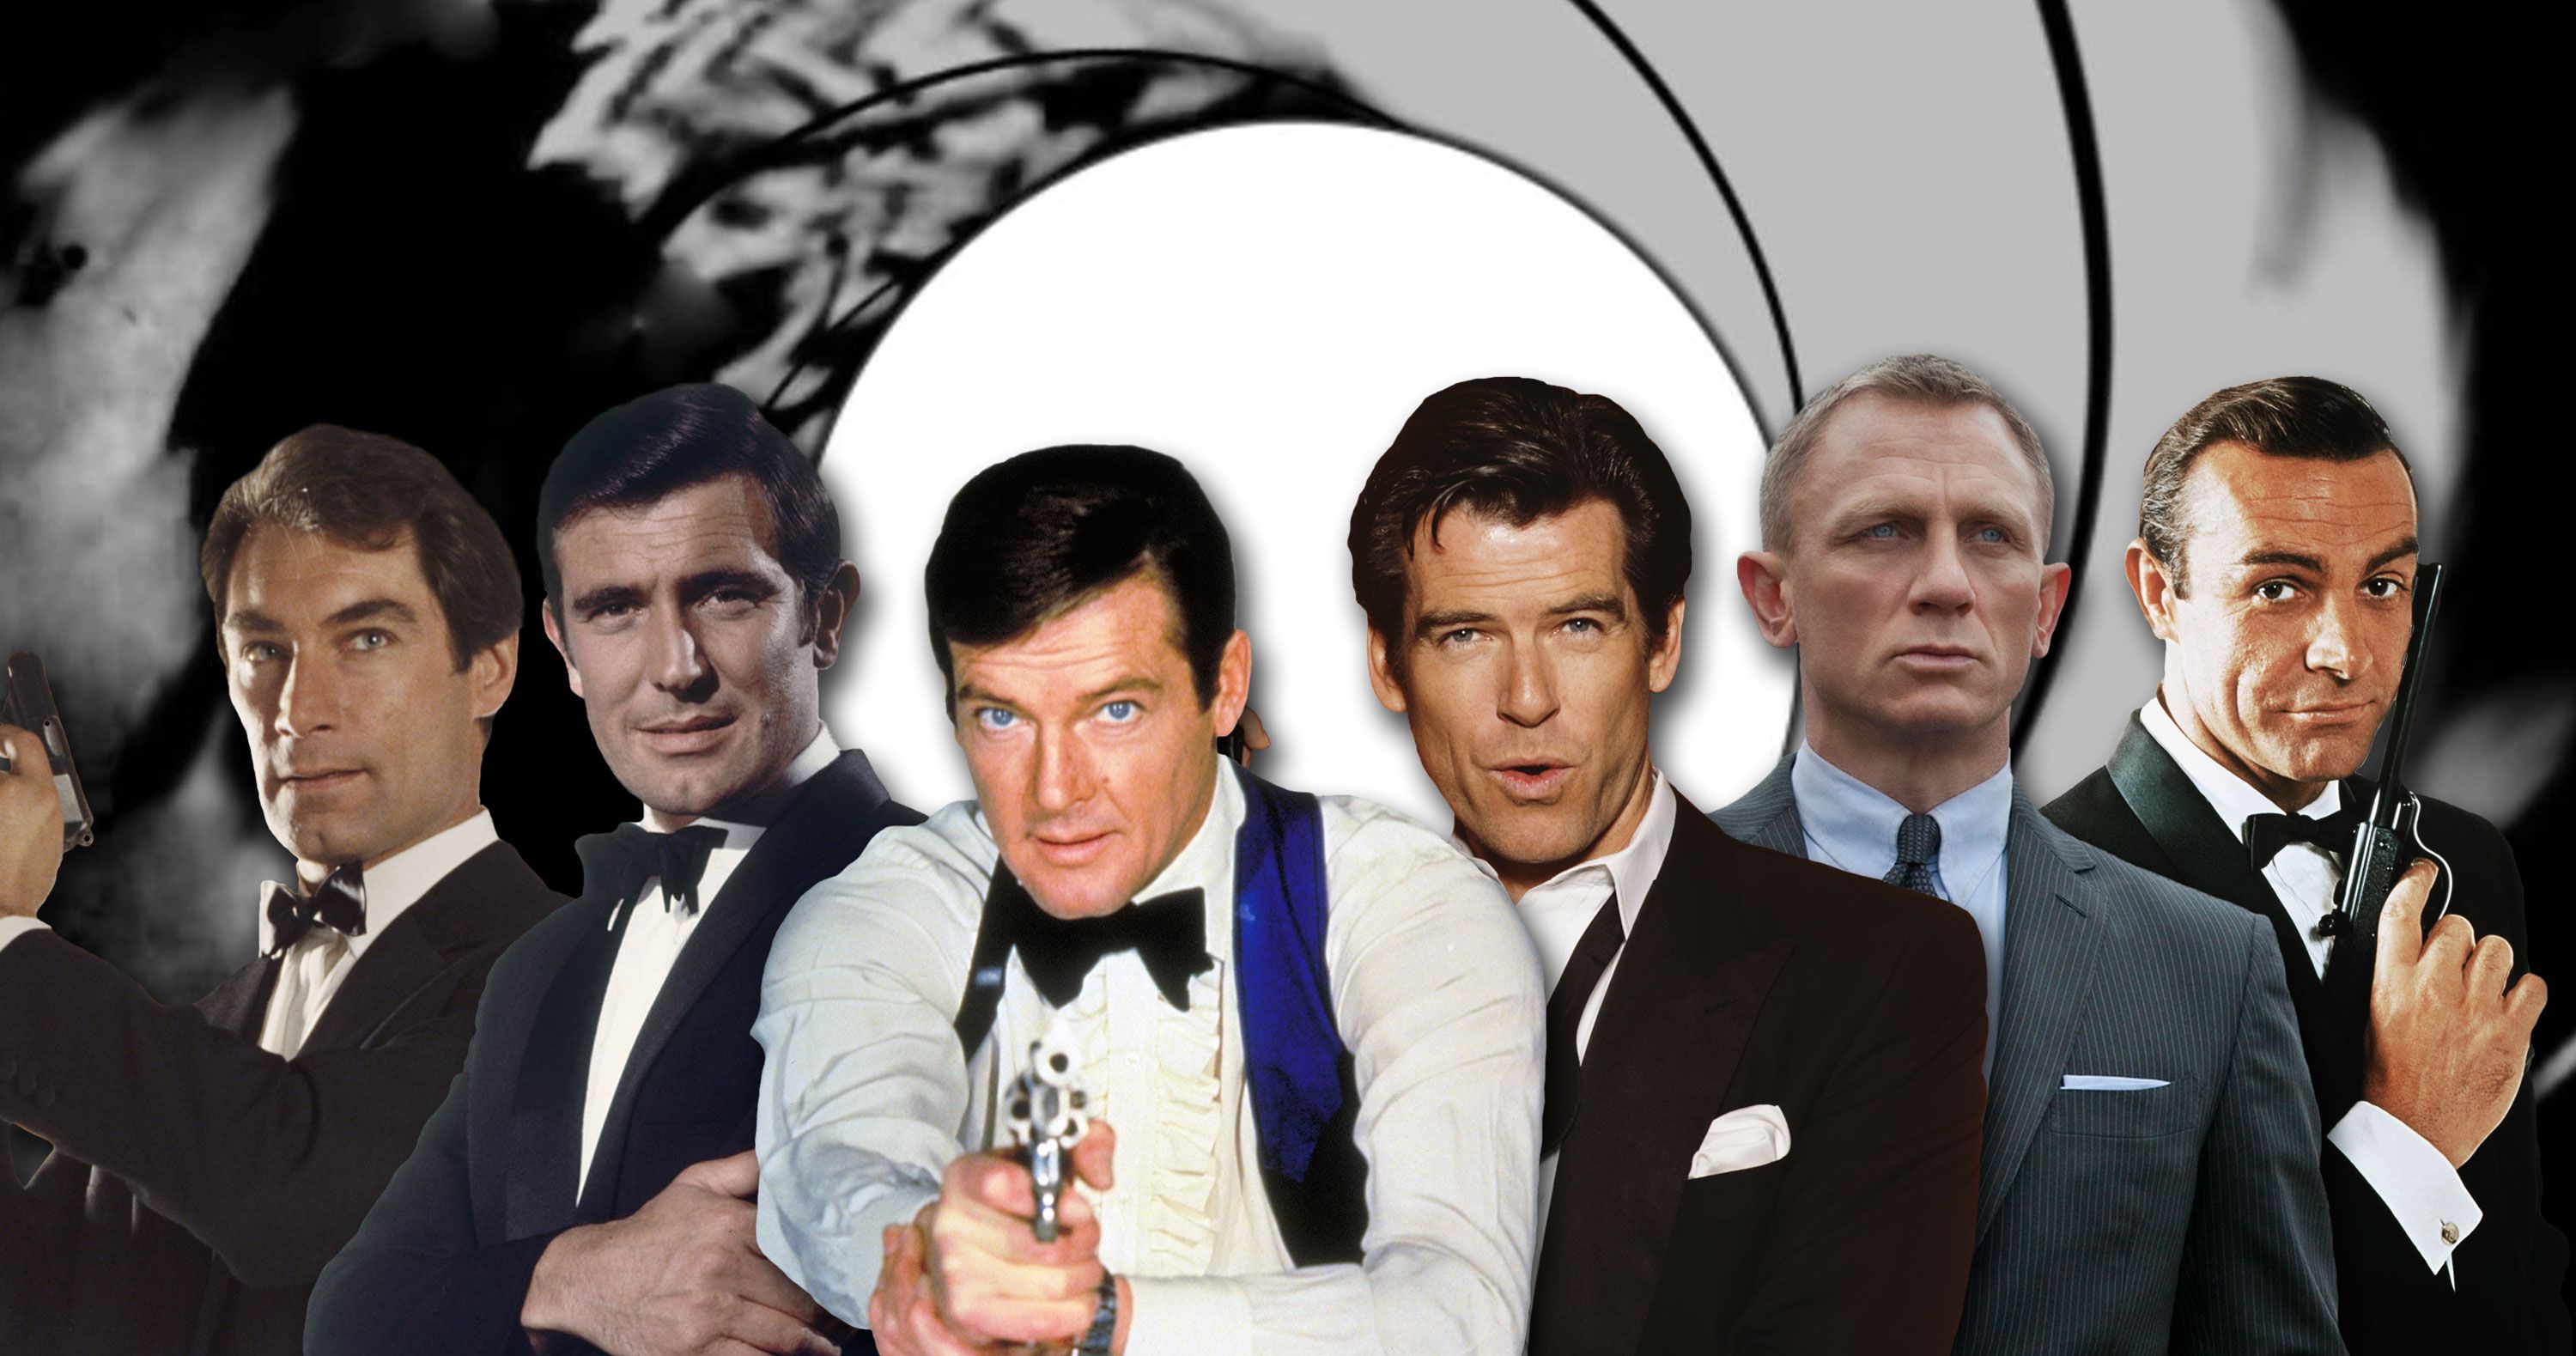 7 Life Lessons You Can Learn From James Bond